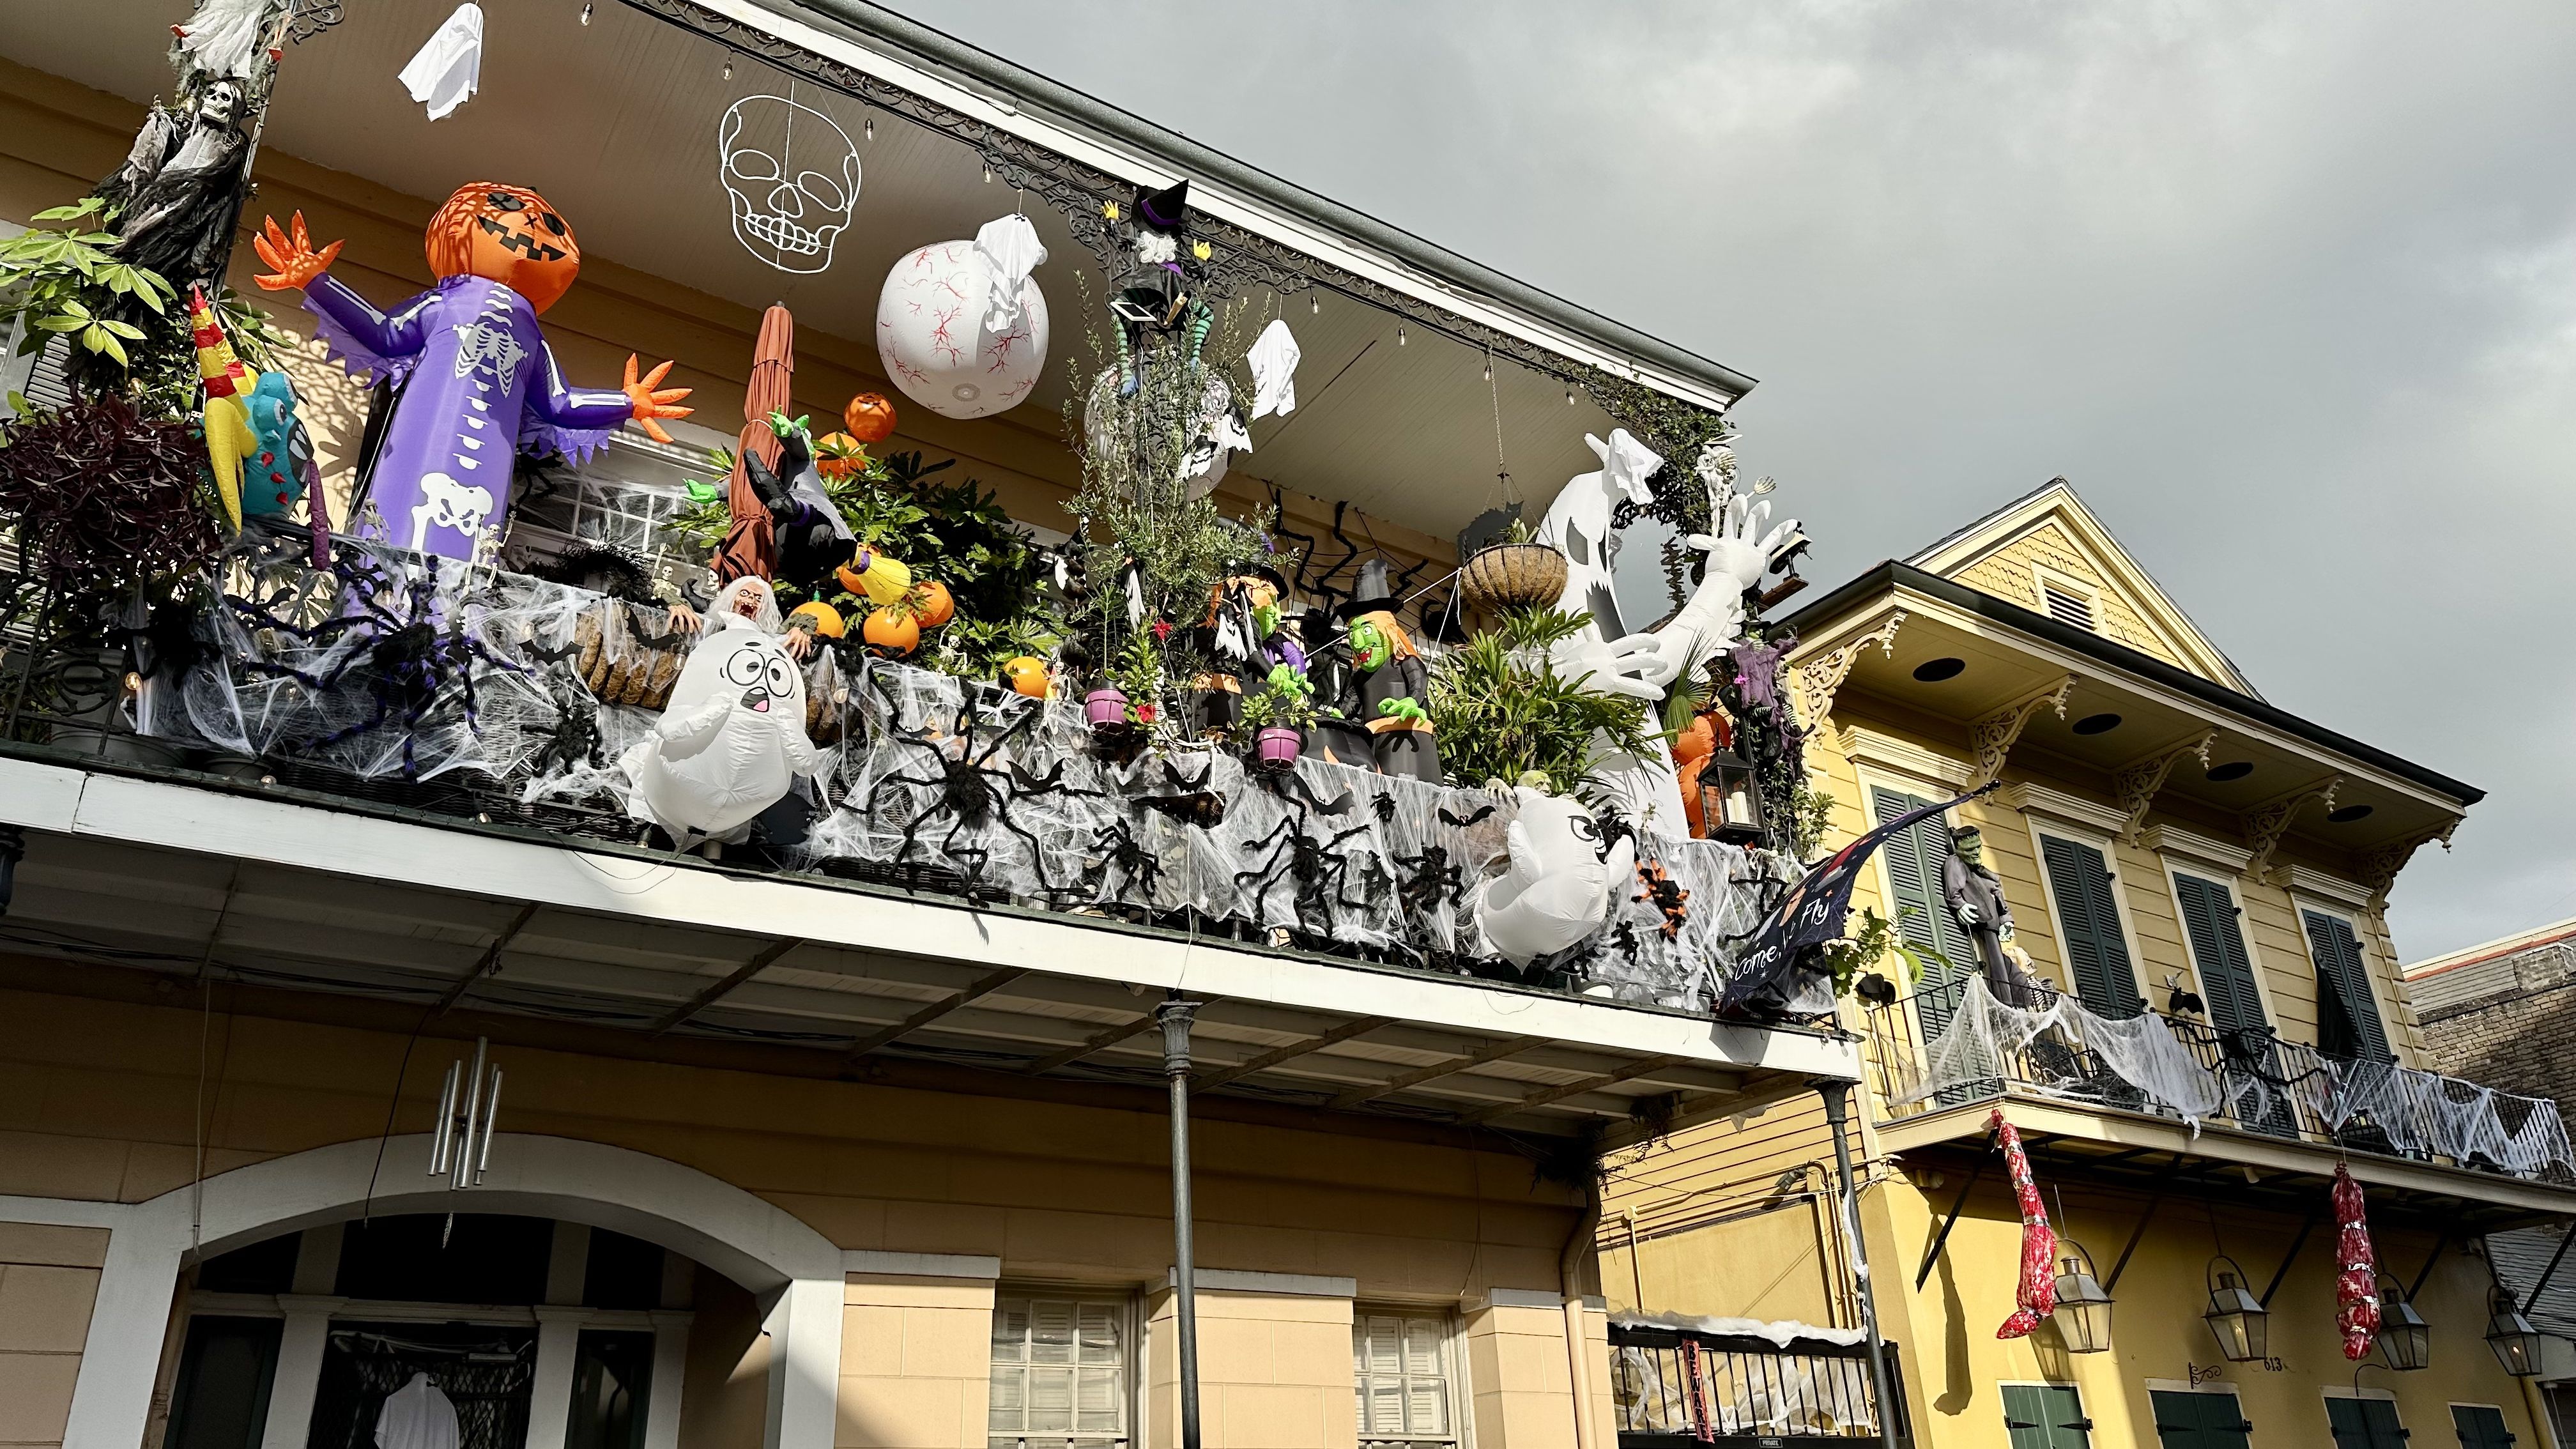 Photo shows French Quarter balconies decorated for Halloween.